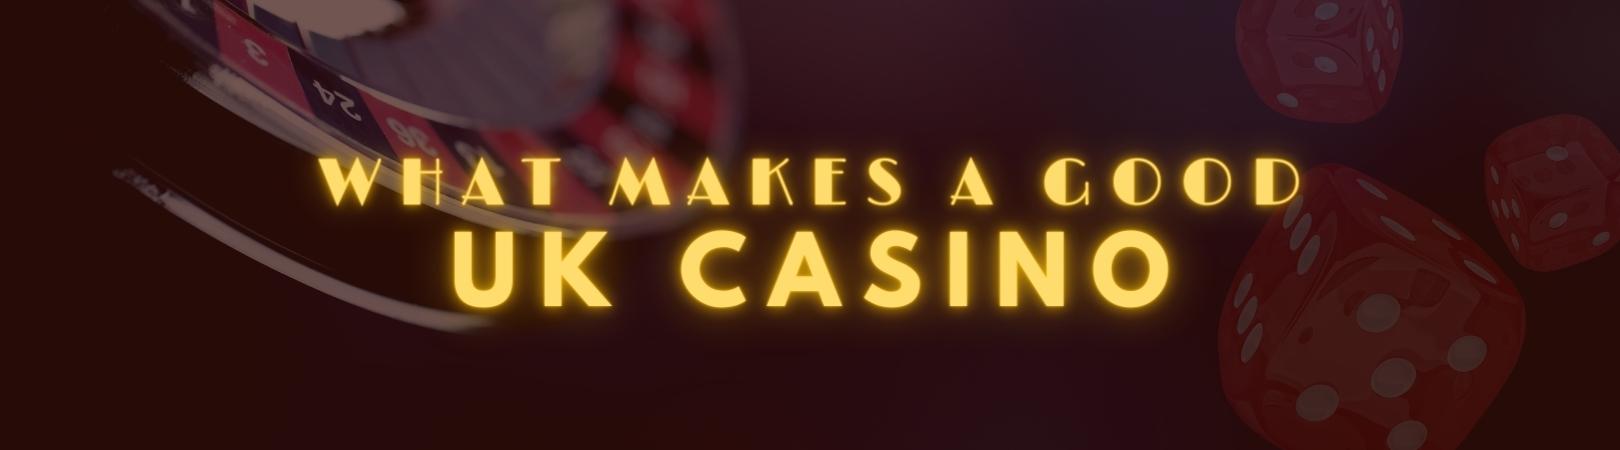 What makes a good UK casino img